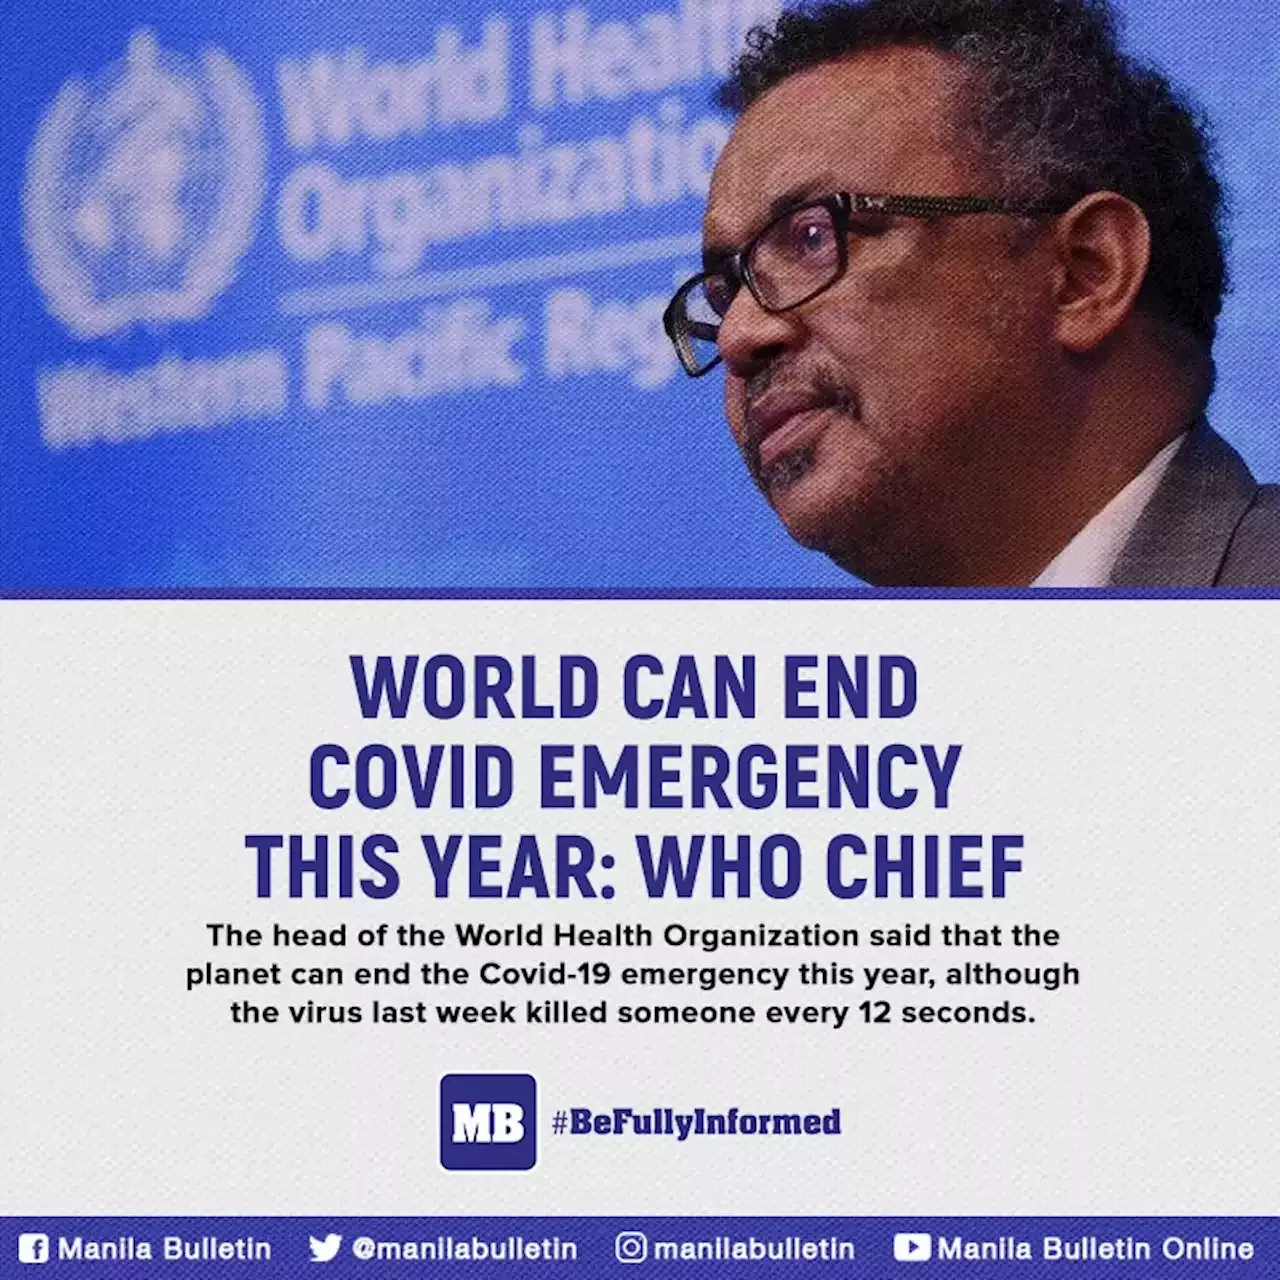 World can end COVID emergency this year: WHO chief